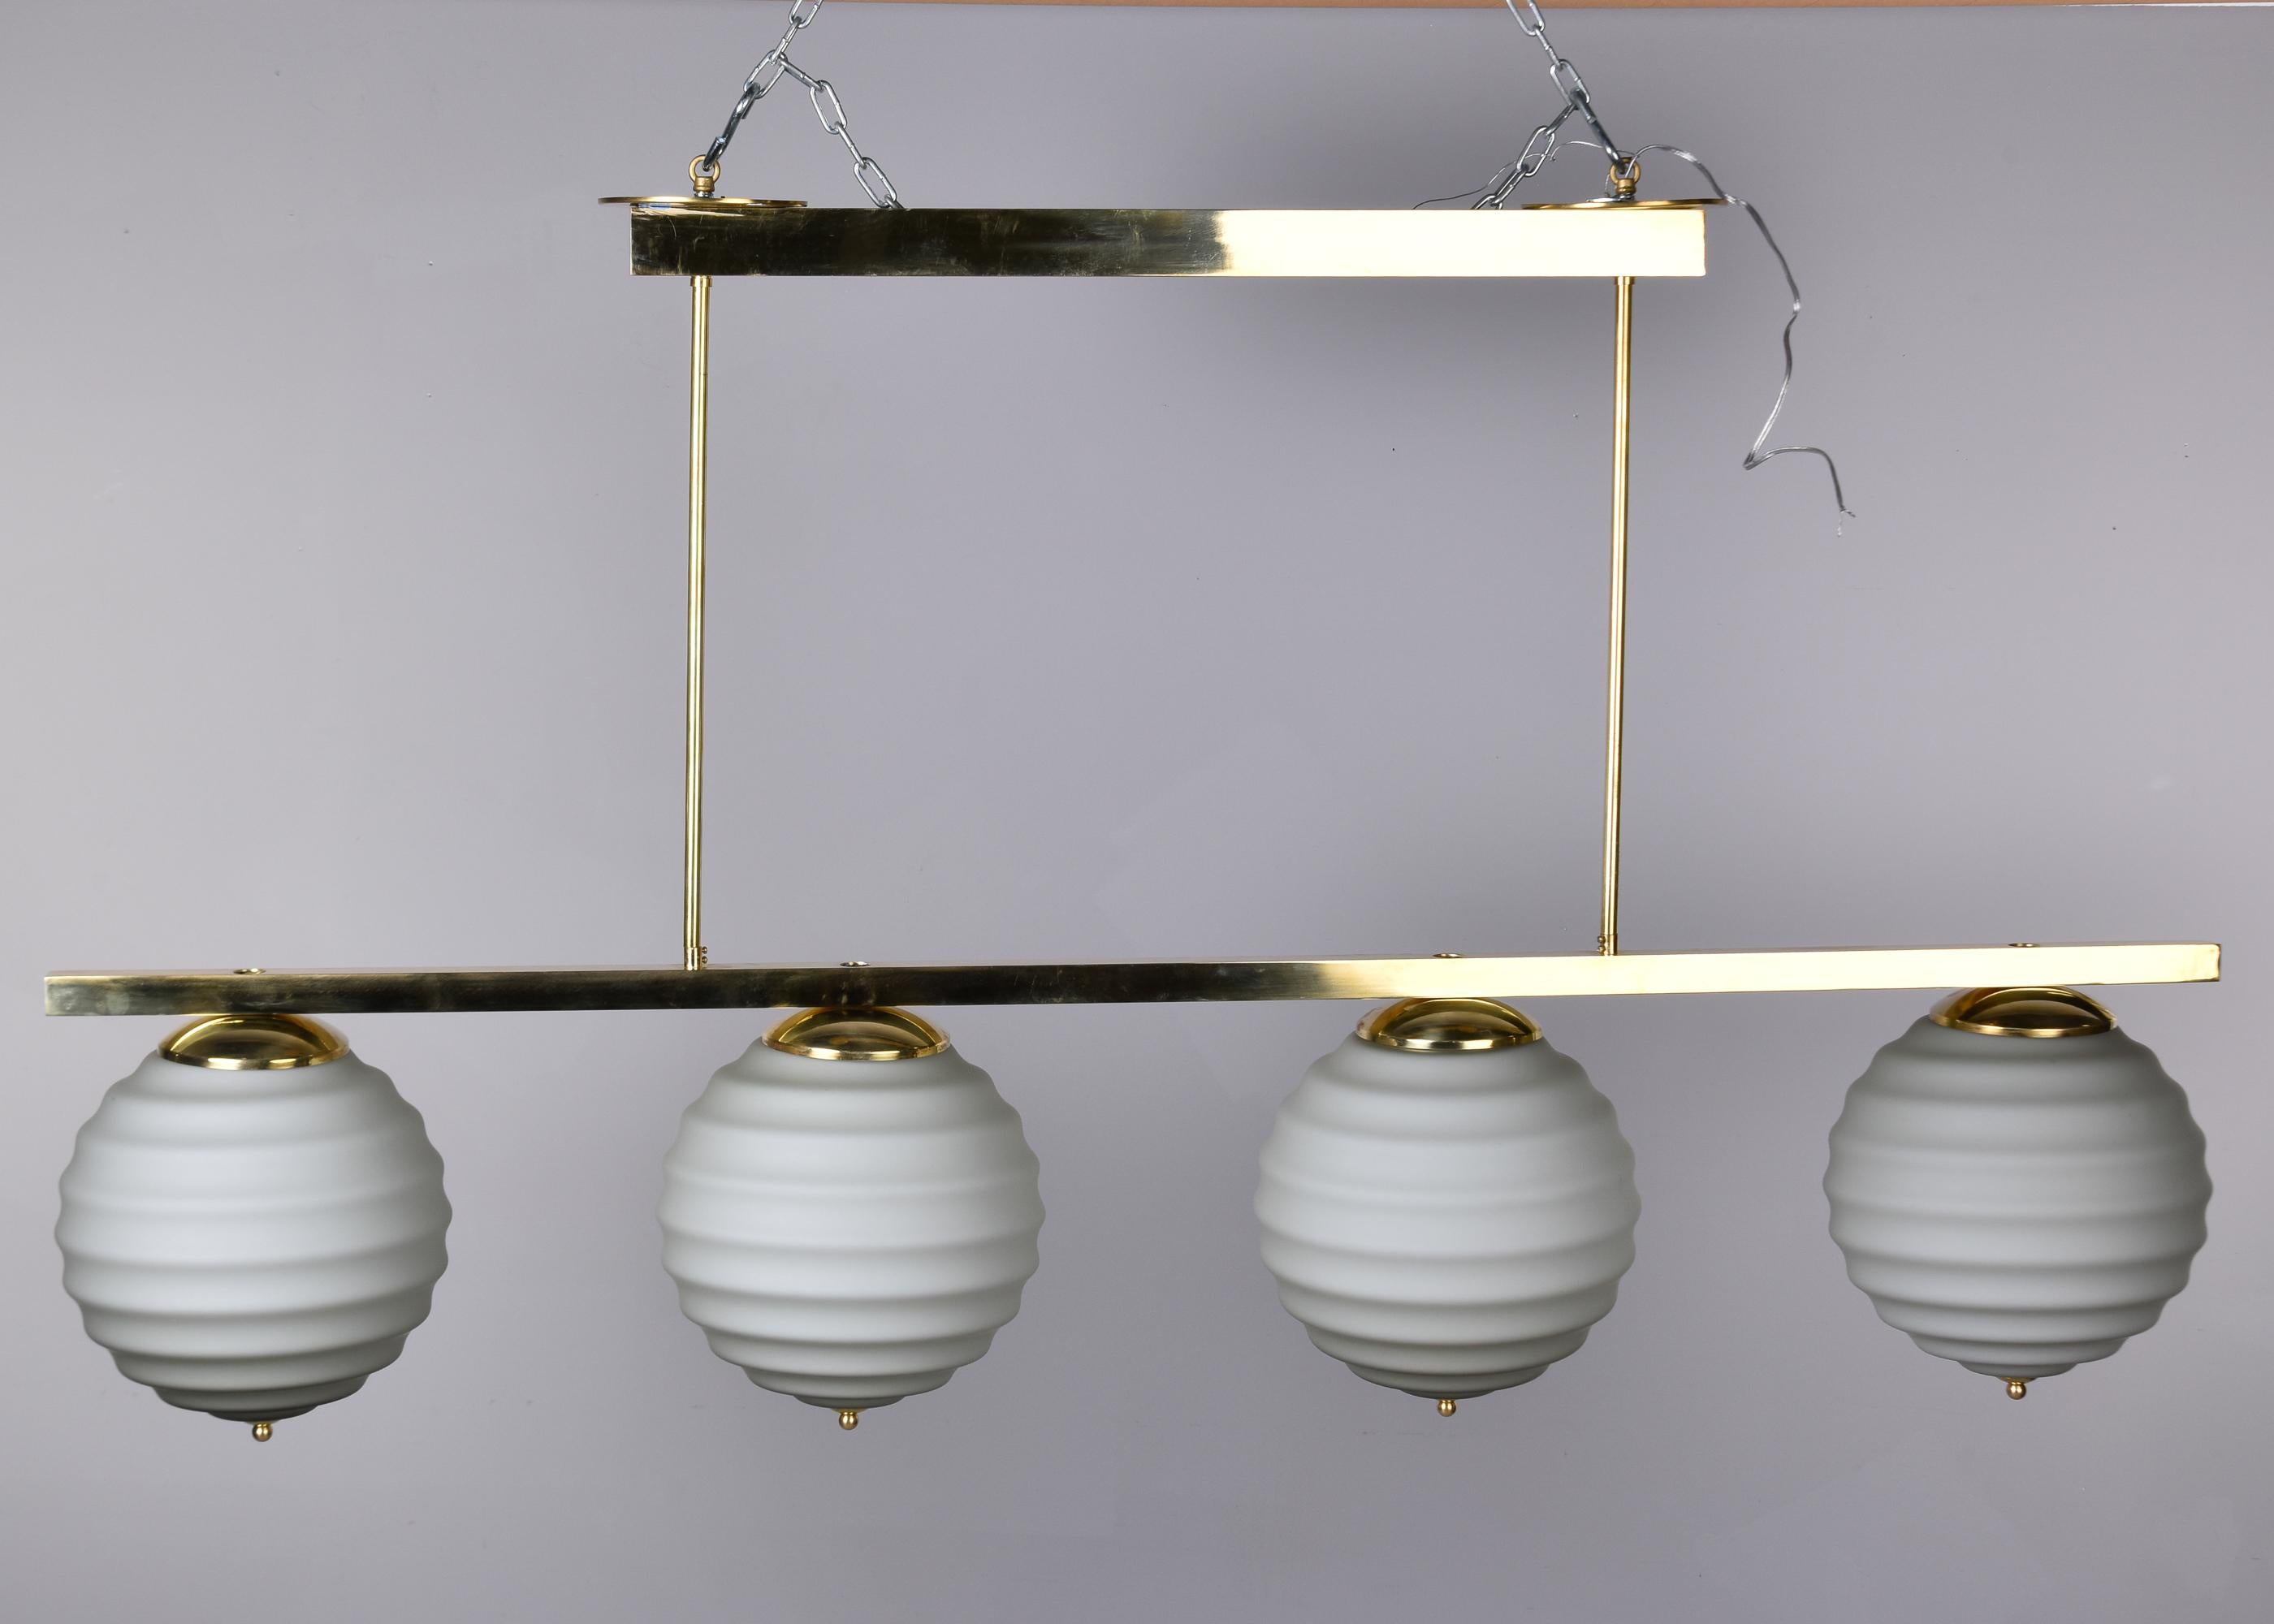 New Italian Fixture with Four Pale Taupe Globes on Horizontal Brass Bar In New Condition For Sale In Troy, MI